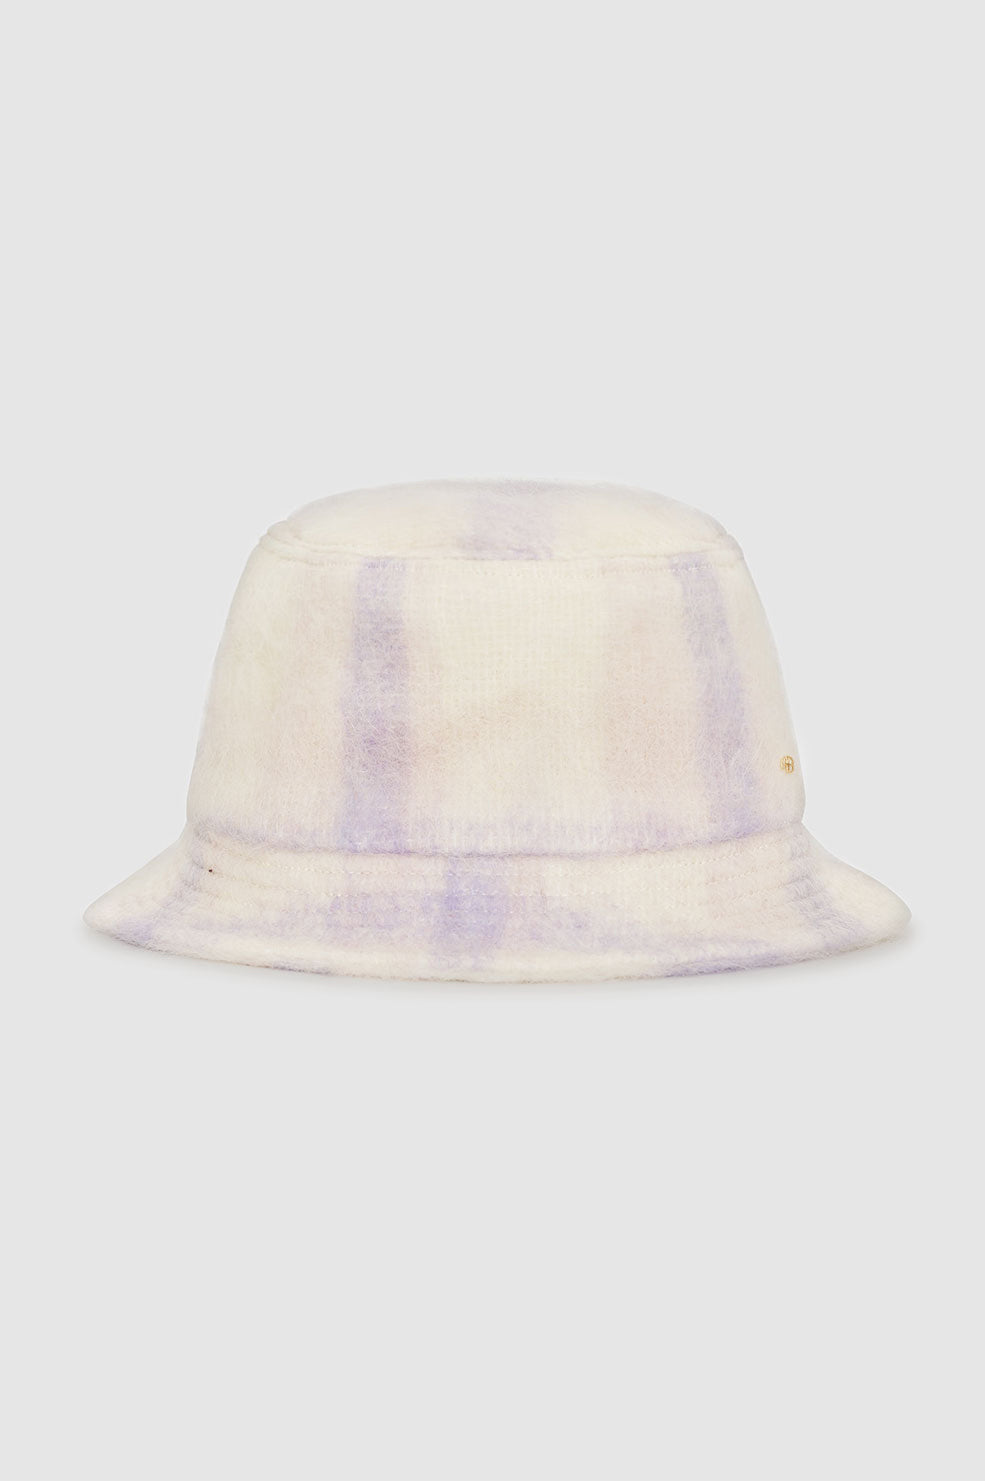 ANINE BING Cami Bucket Hat - Lavender And Cream Check